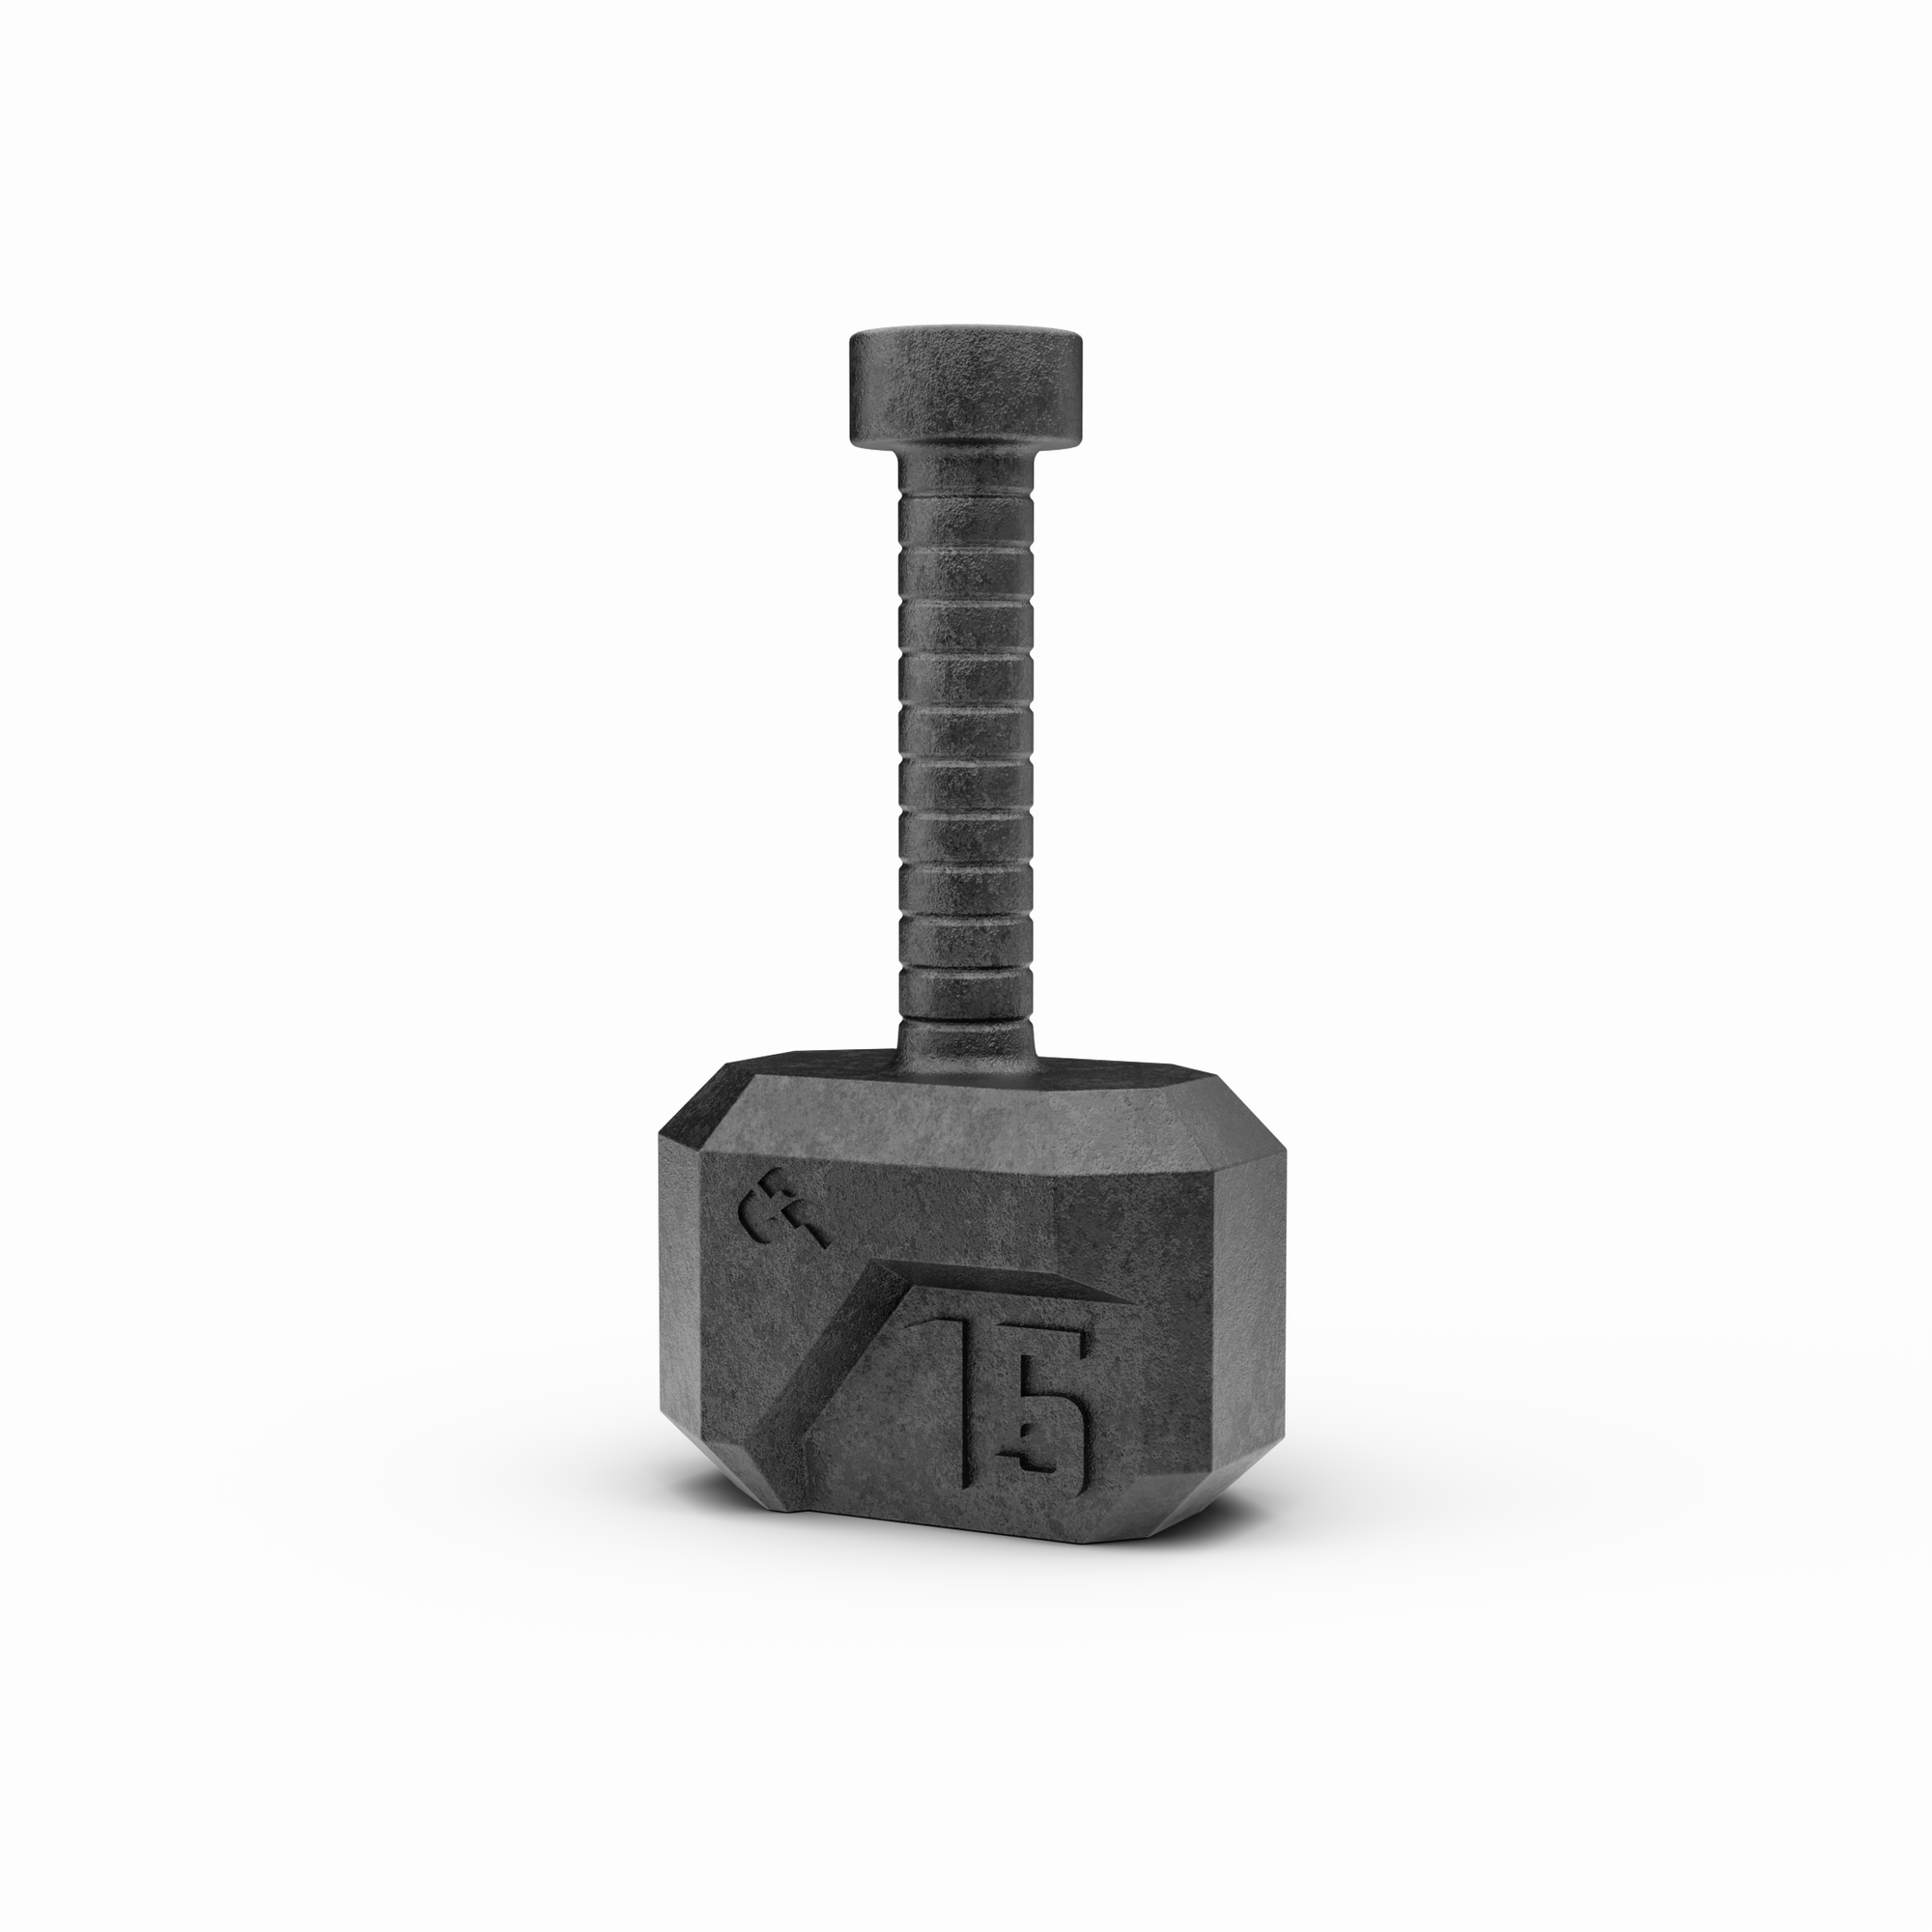 Thor's Hammer - 15kg (Limited Edition)